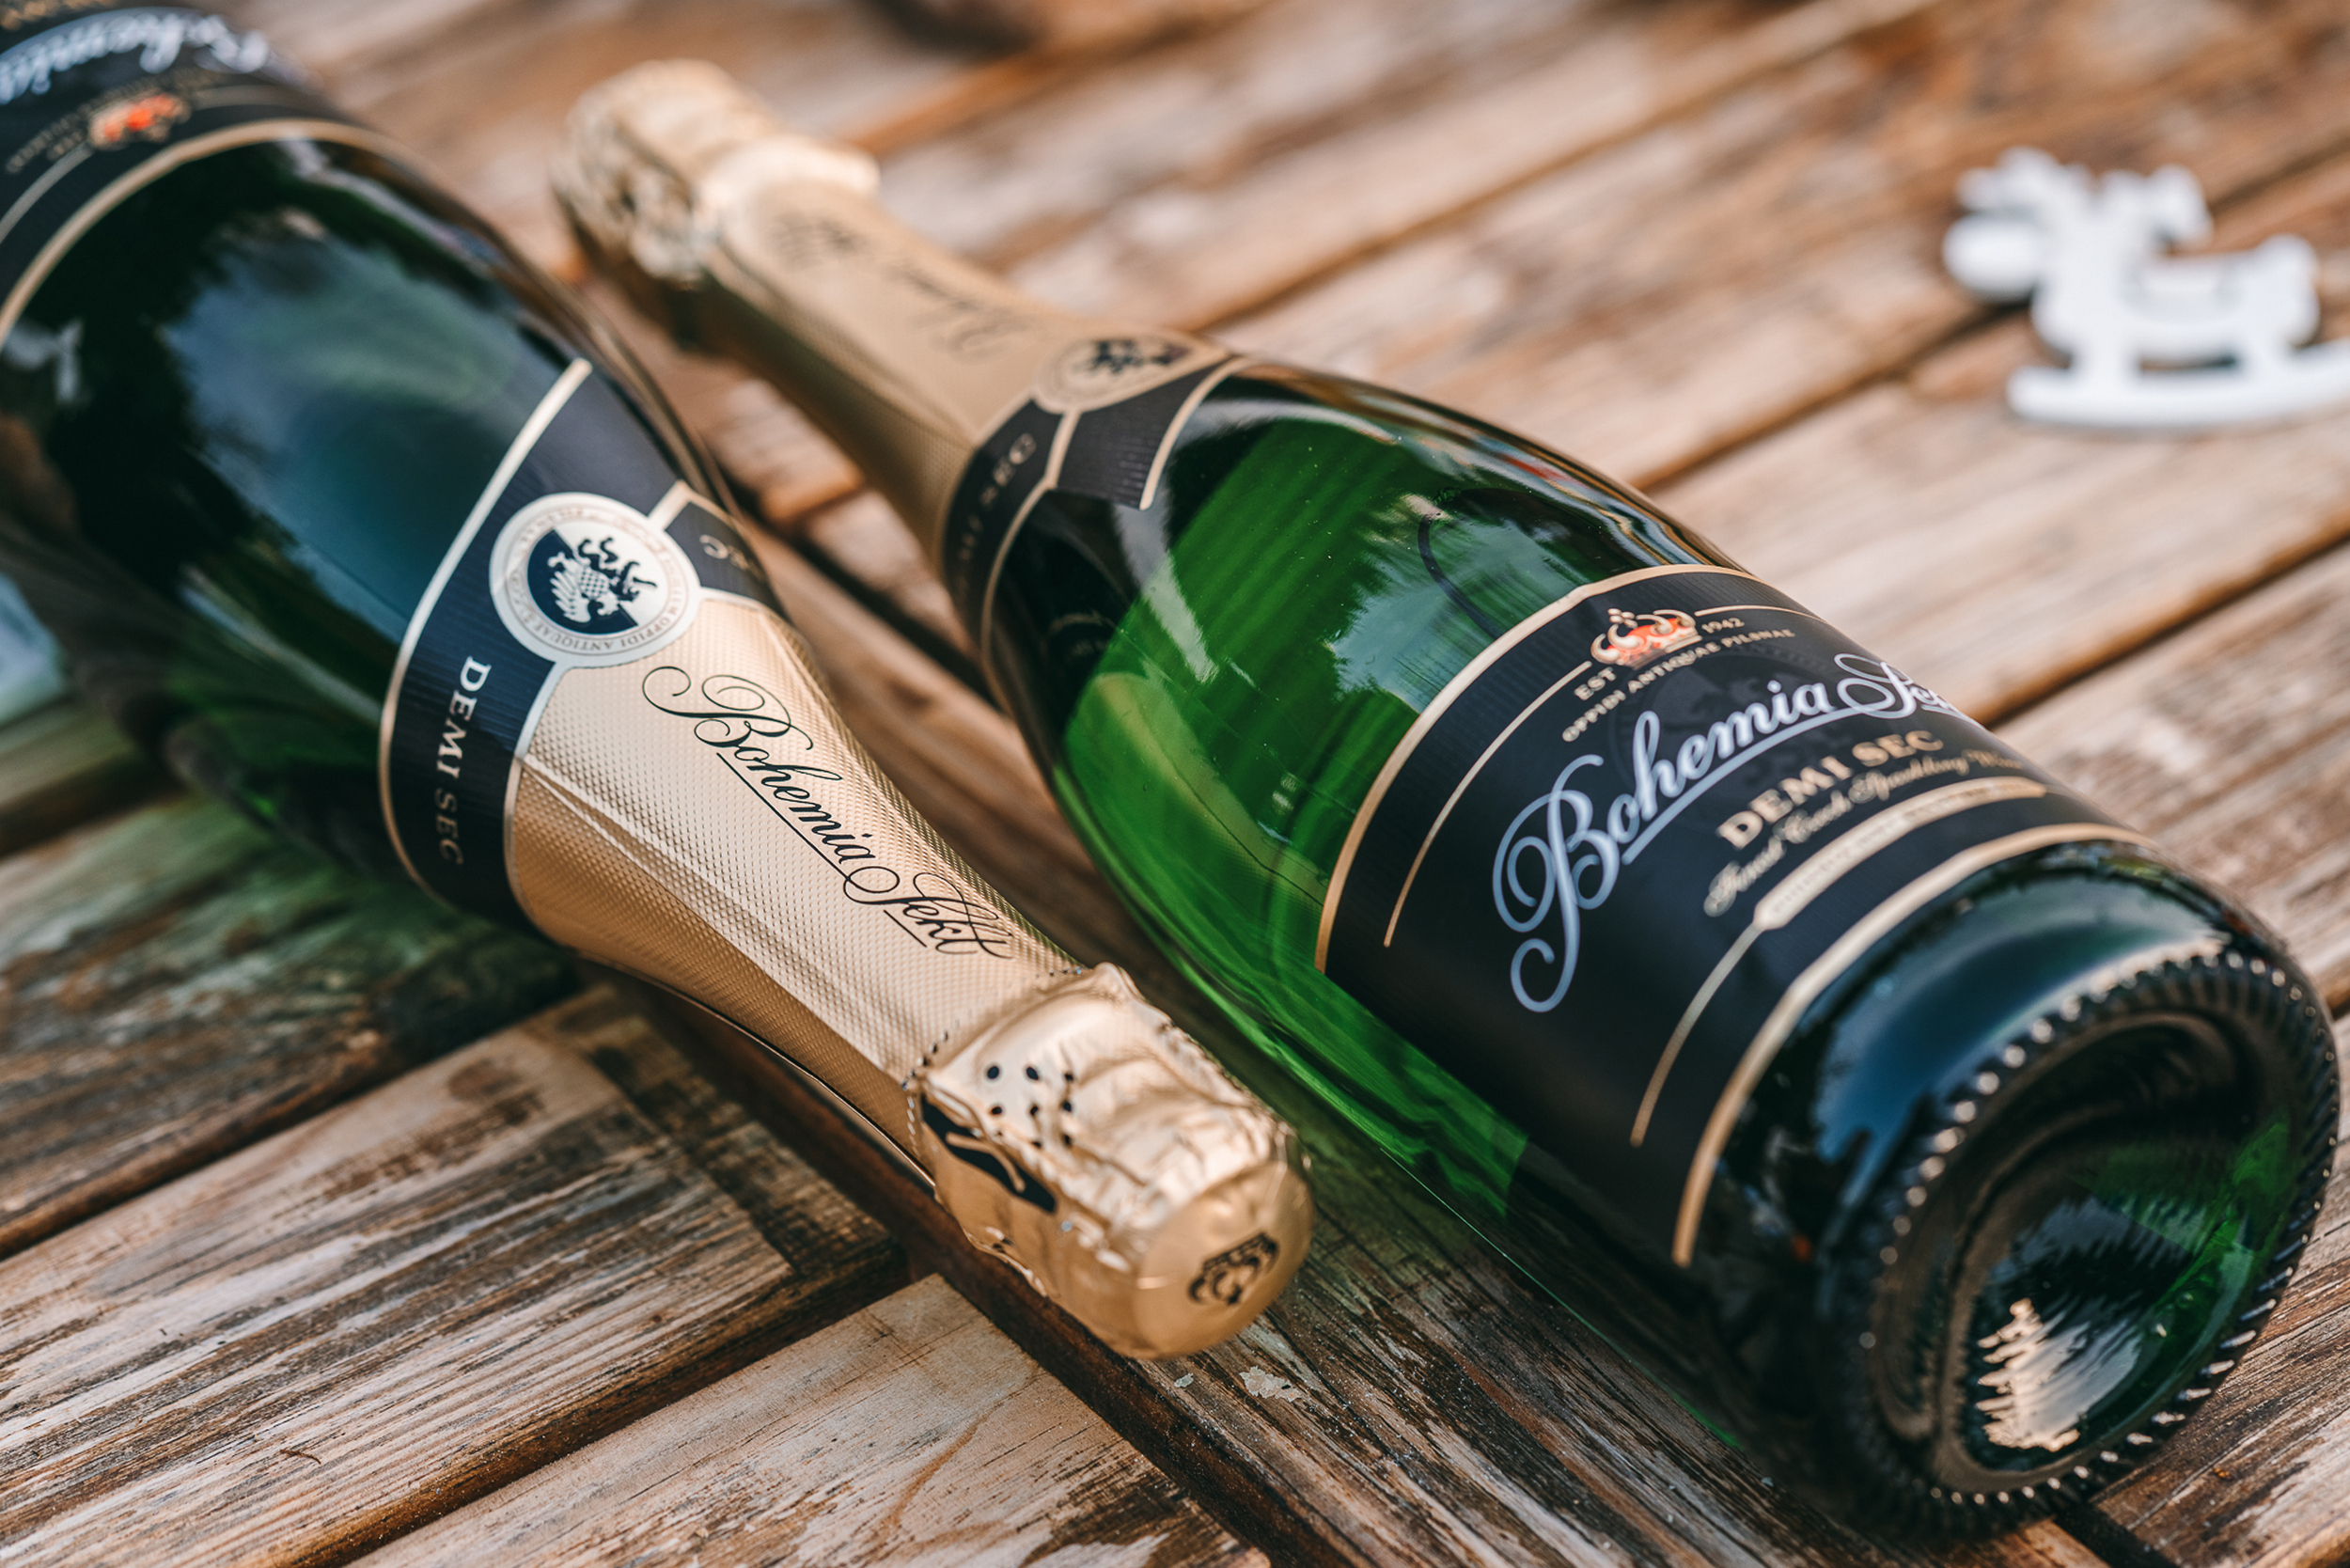 Our sparkling wines